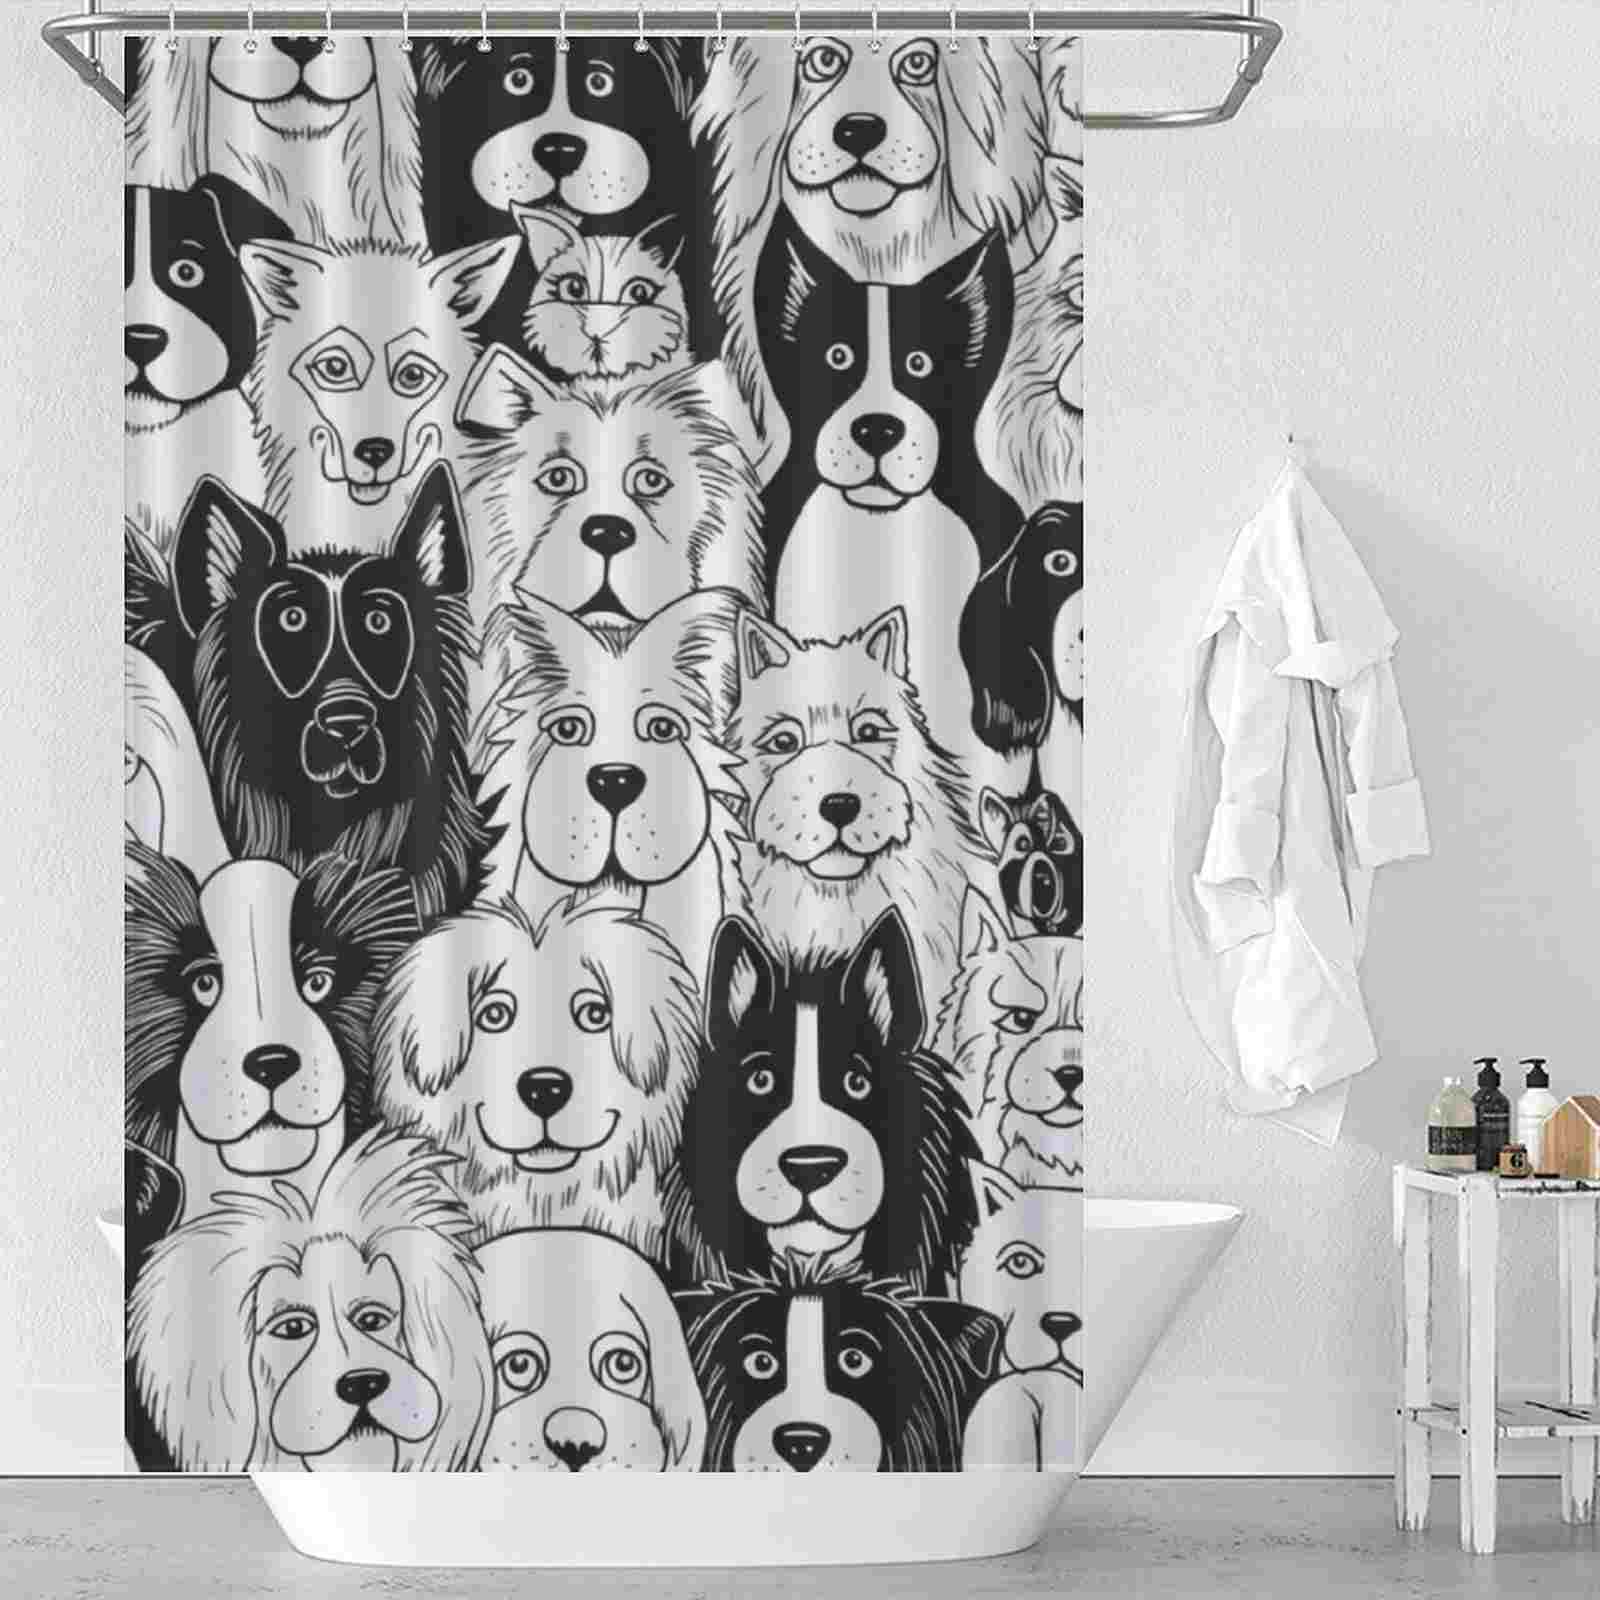 A black and white shower curtain with many dogs on it.